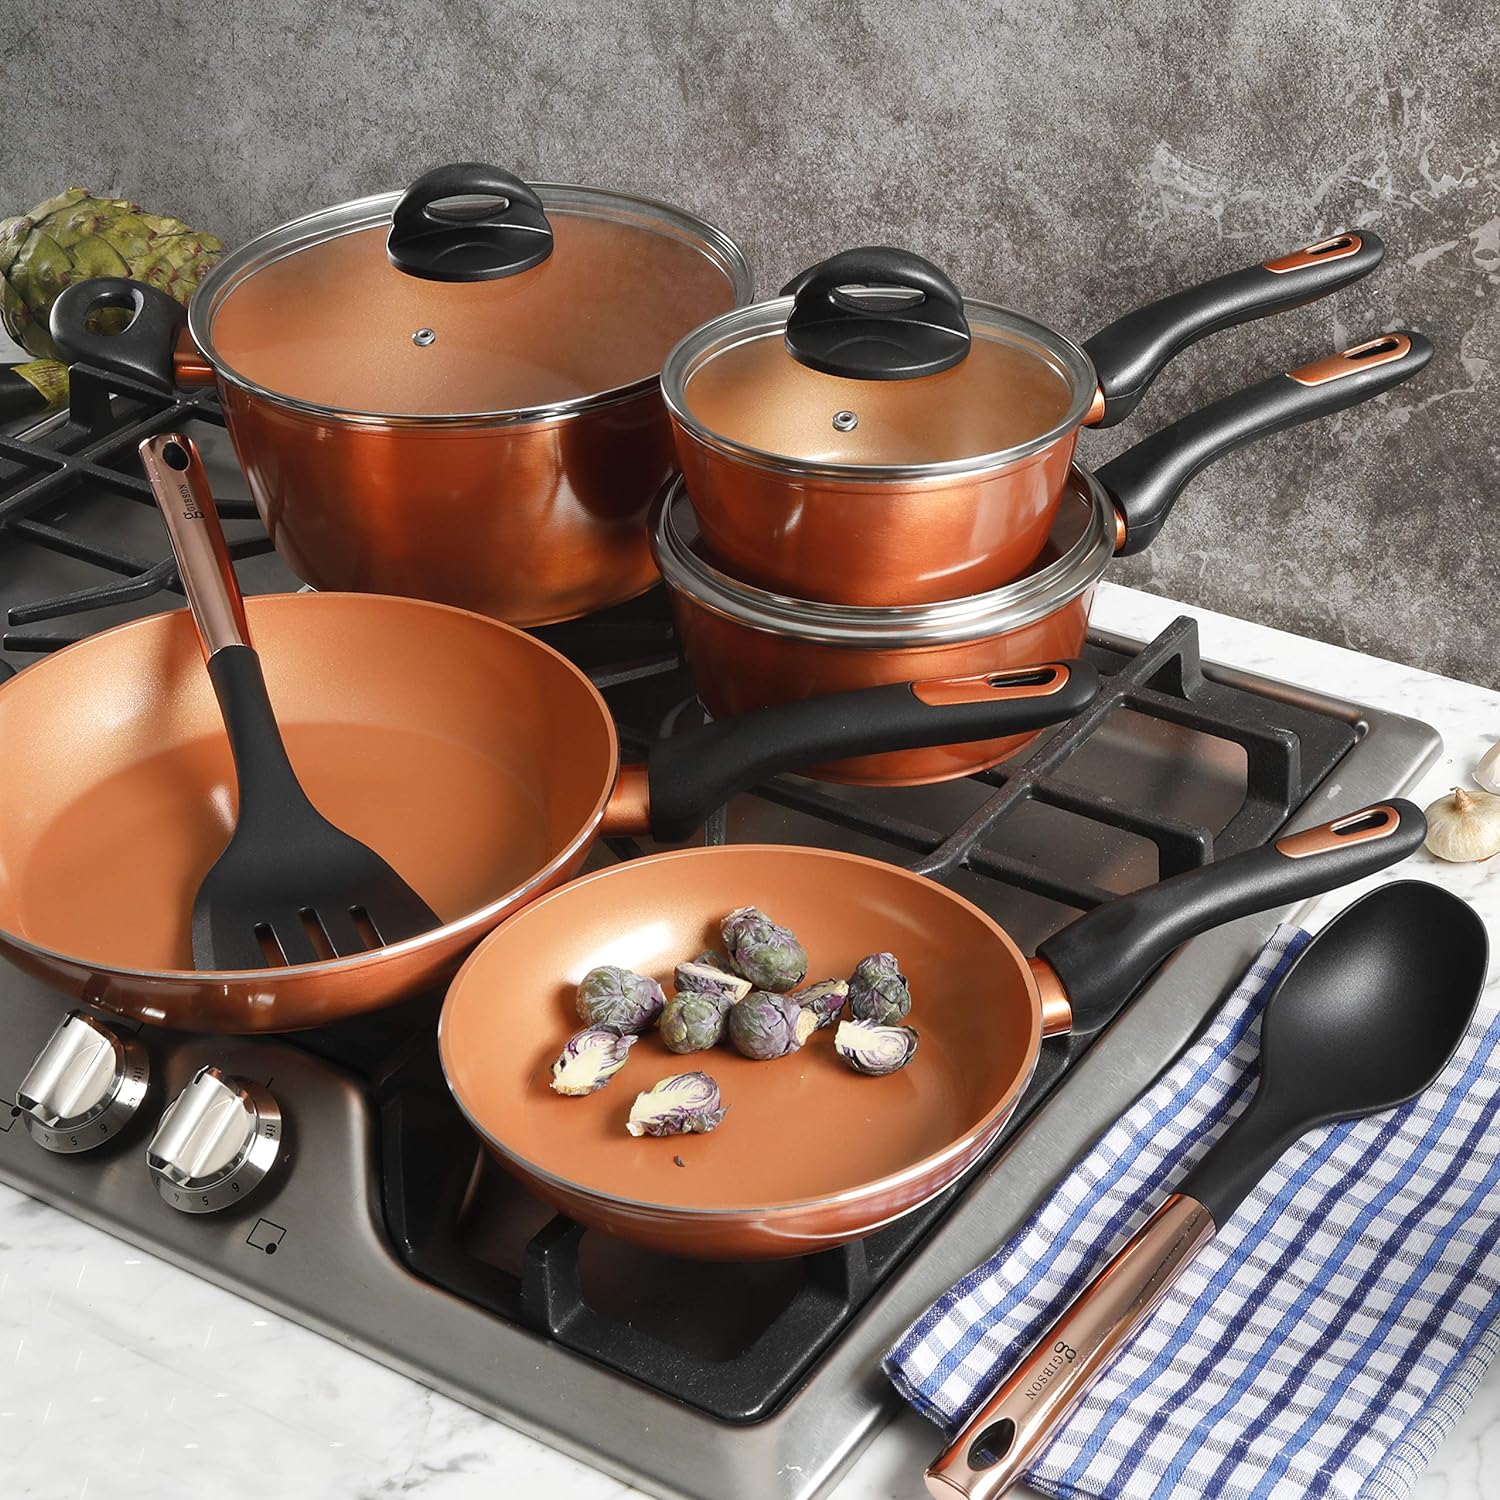 a picture of non-stick kitchen tools to sell online for profit